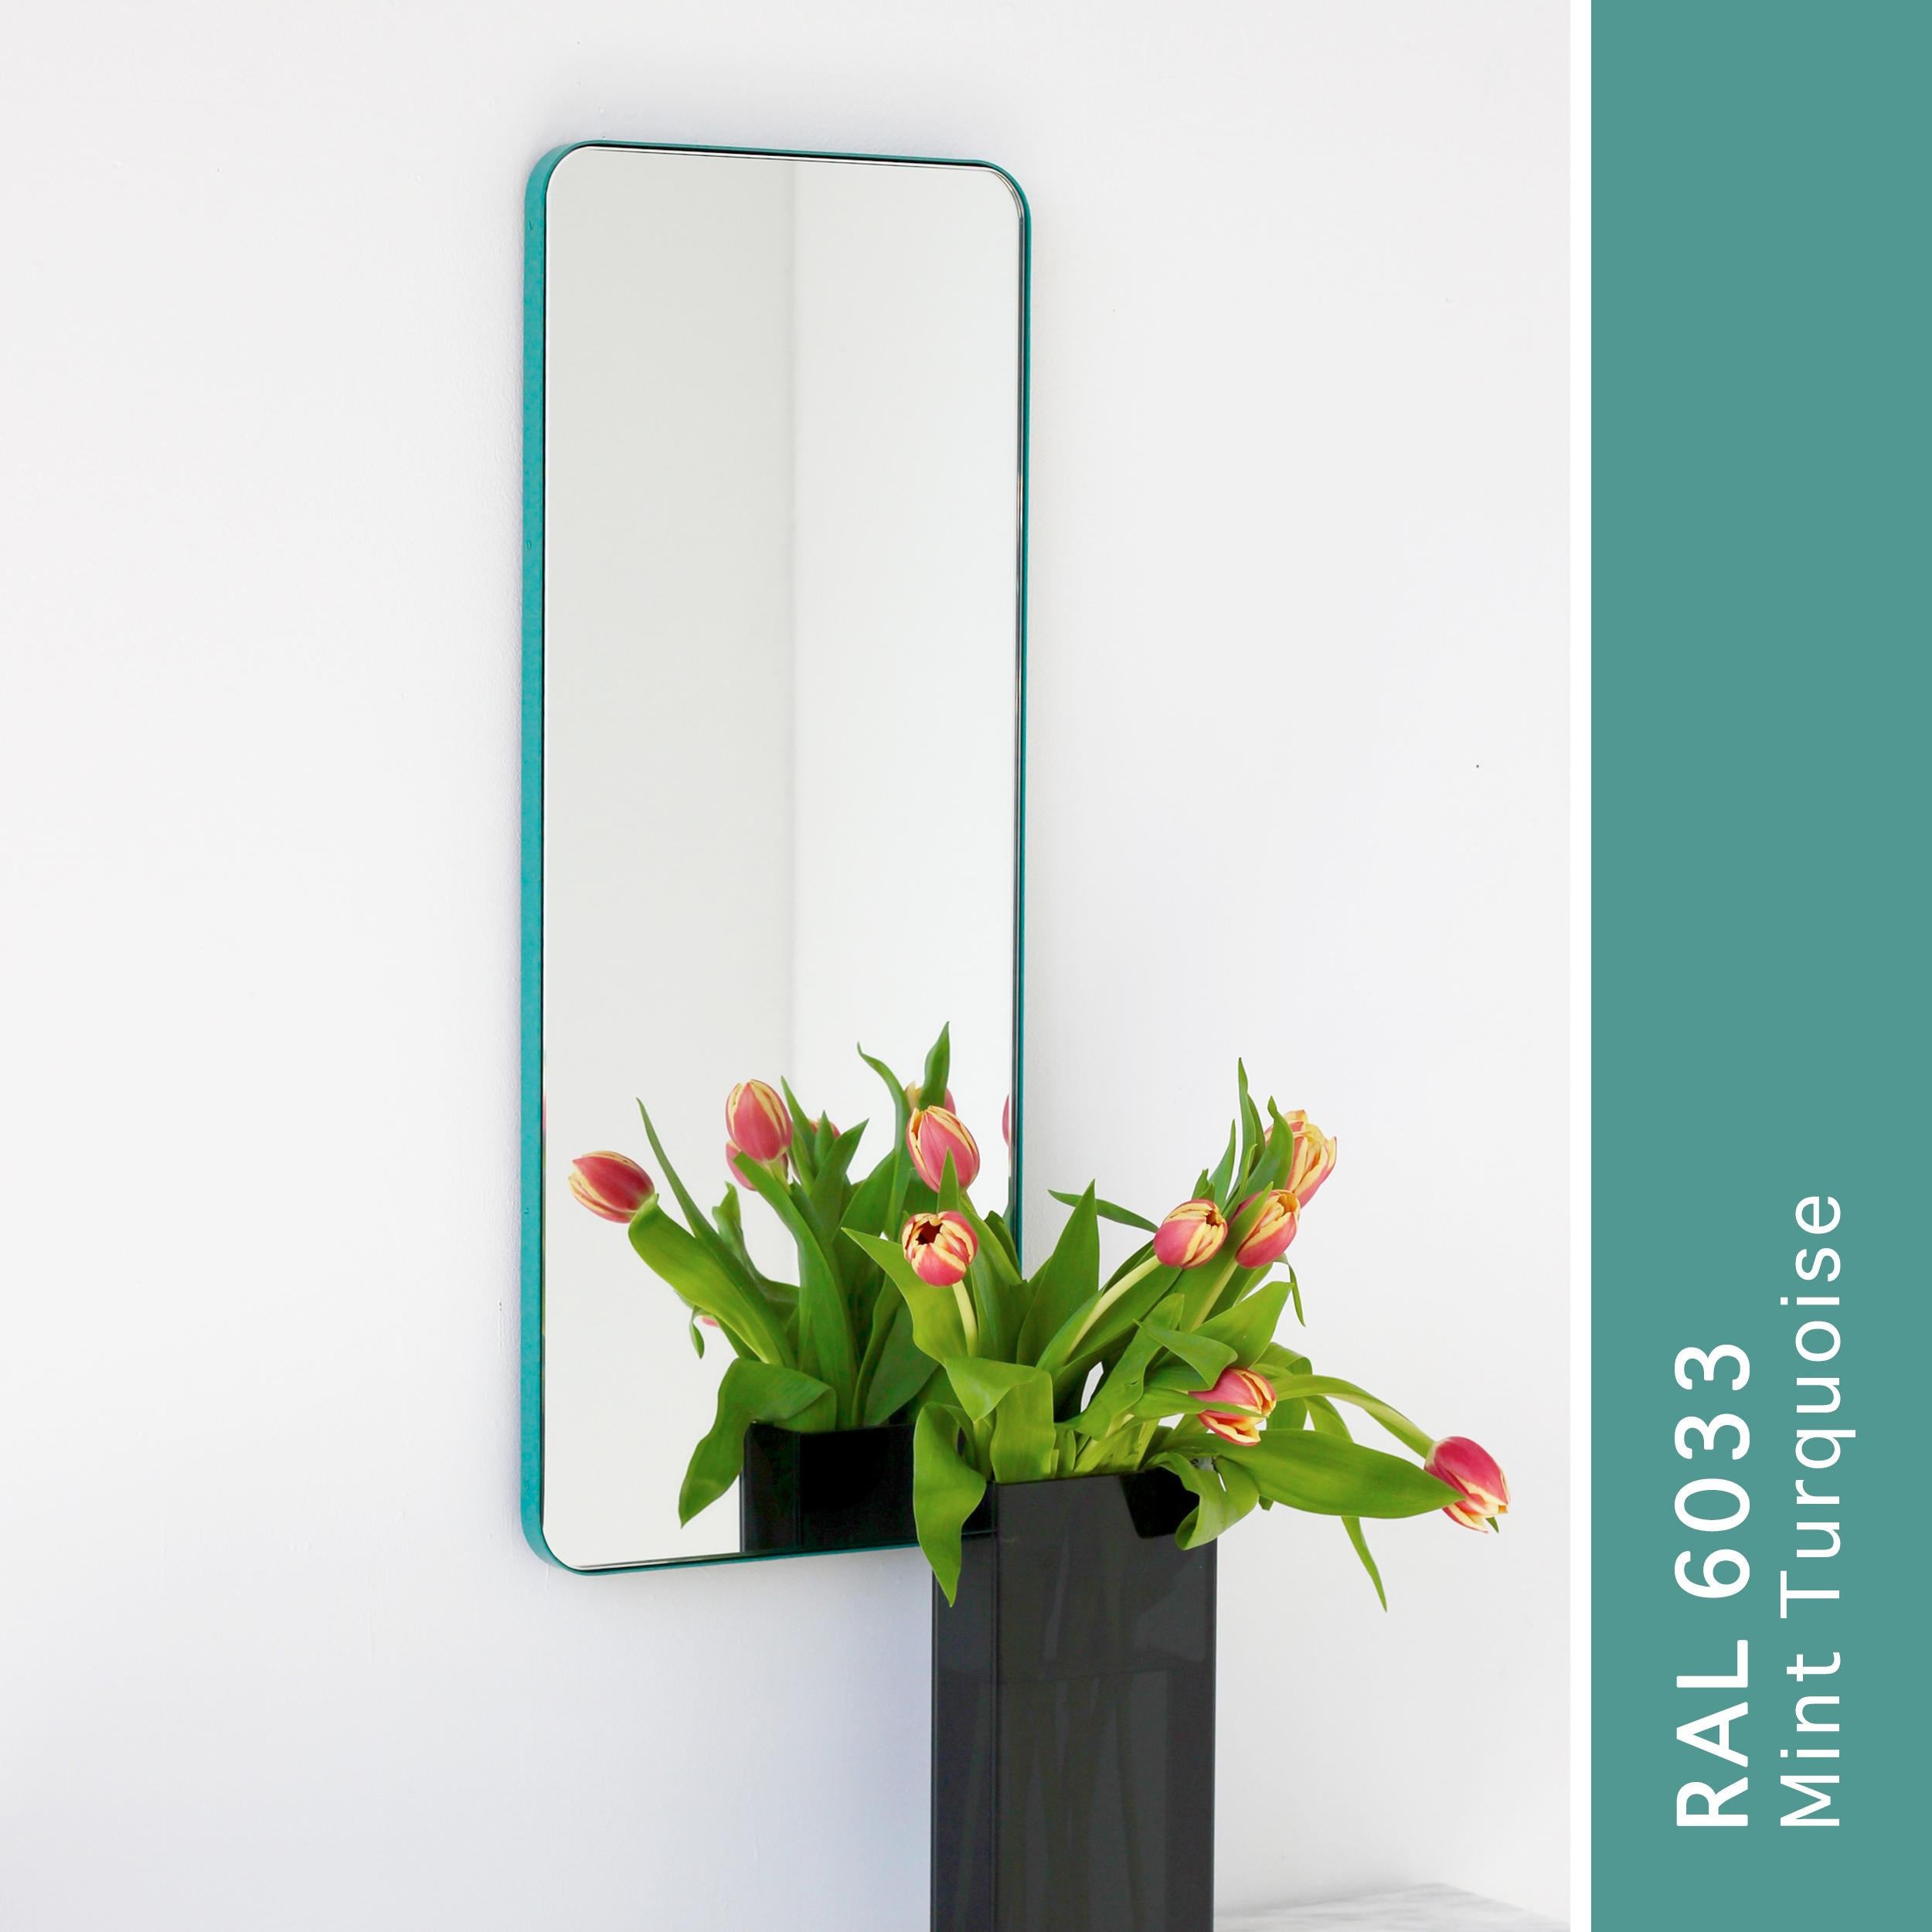 Quadris Rectangular Modern Mirror with Mint Turquoise Frame, XL For Sale 2